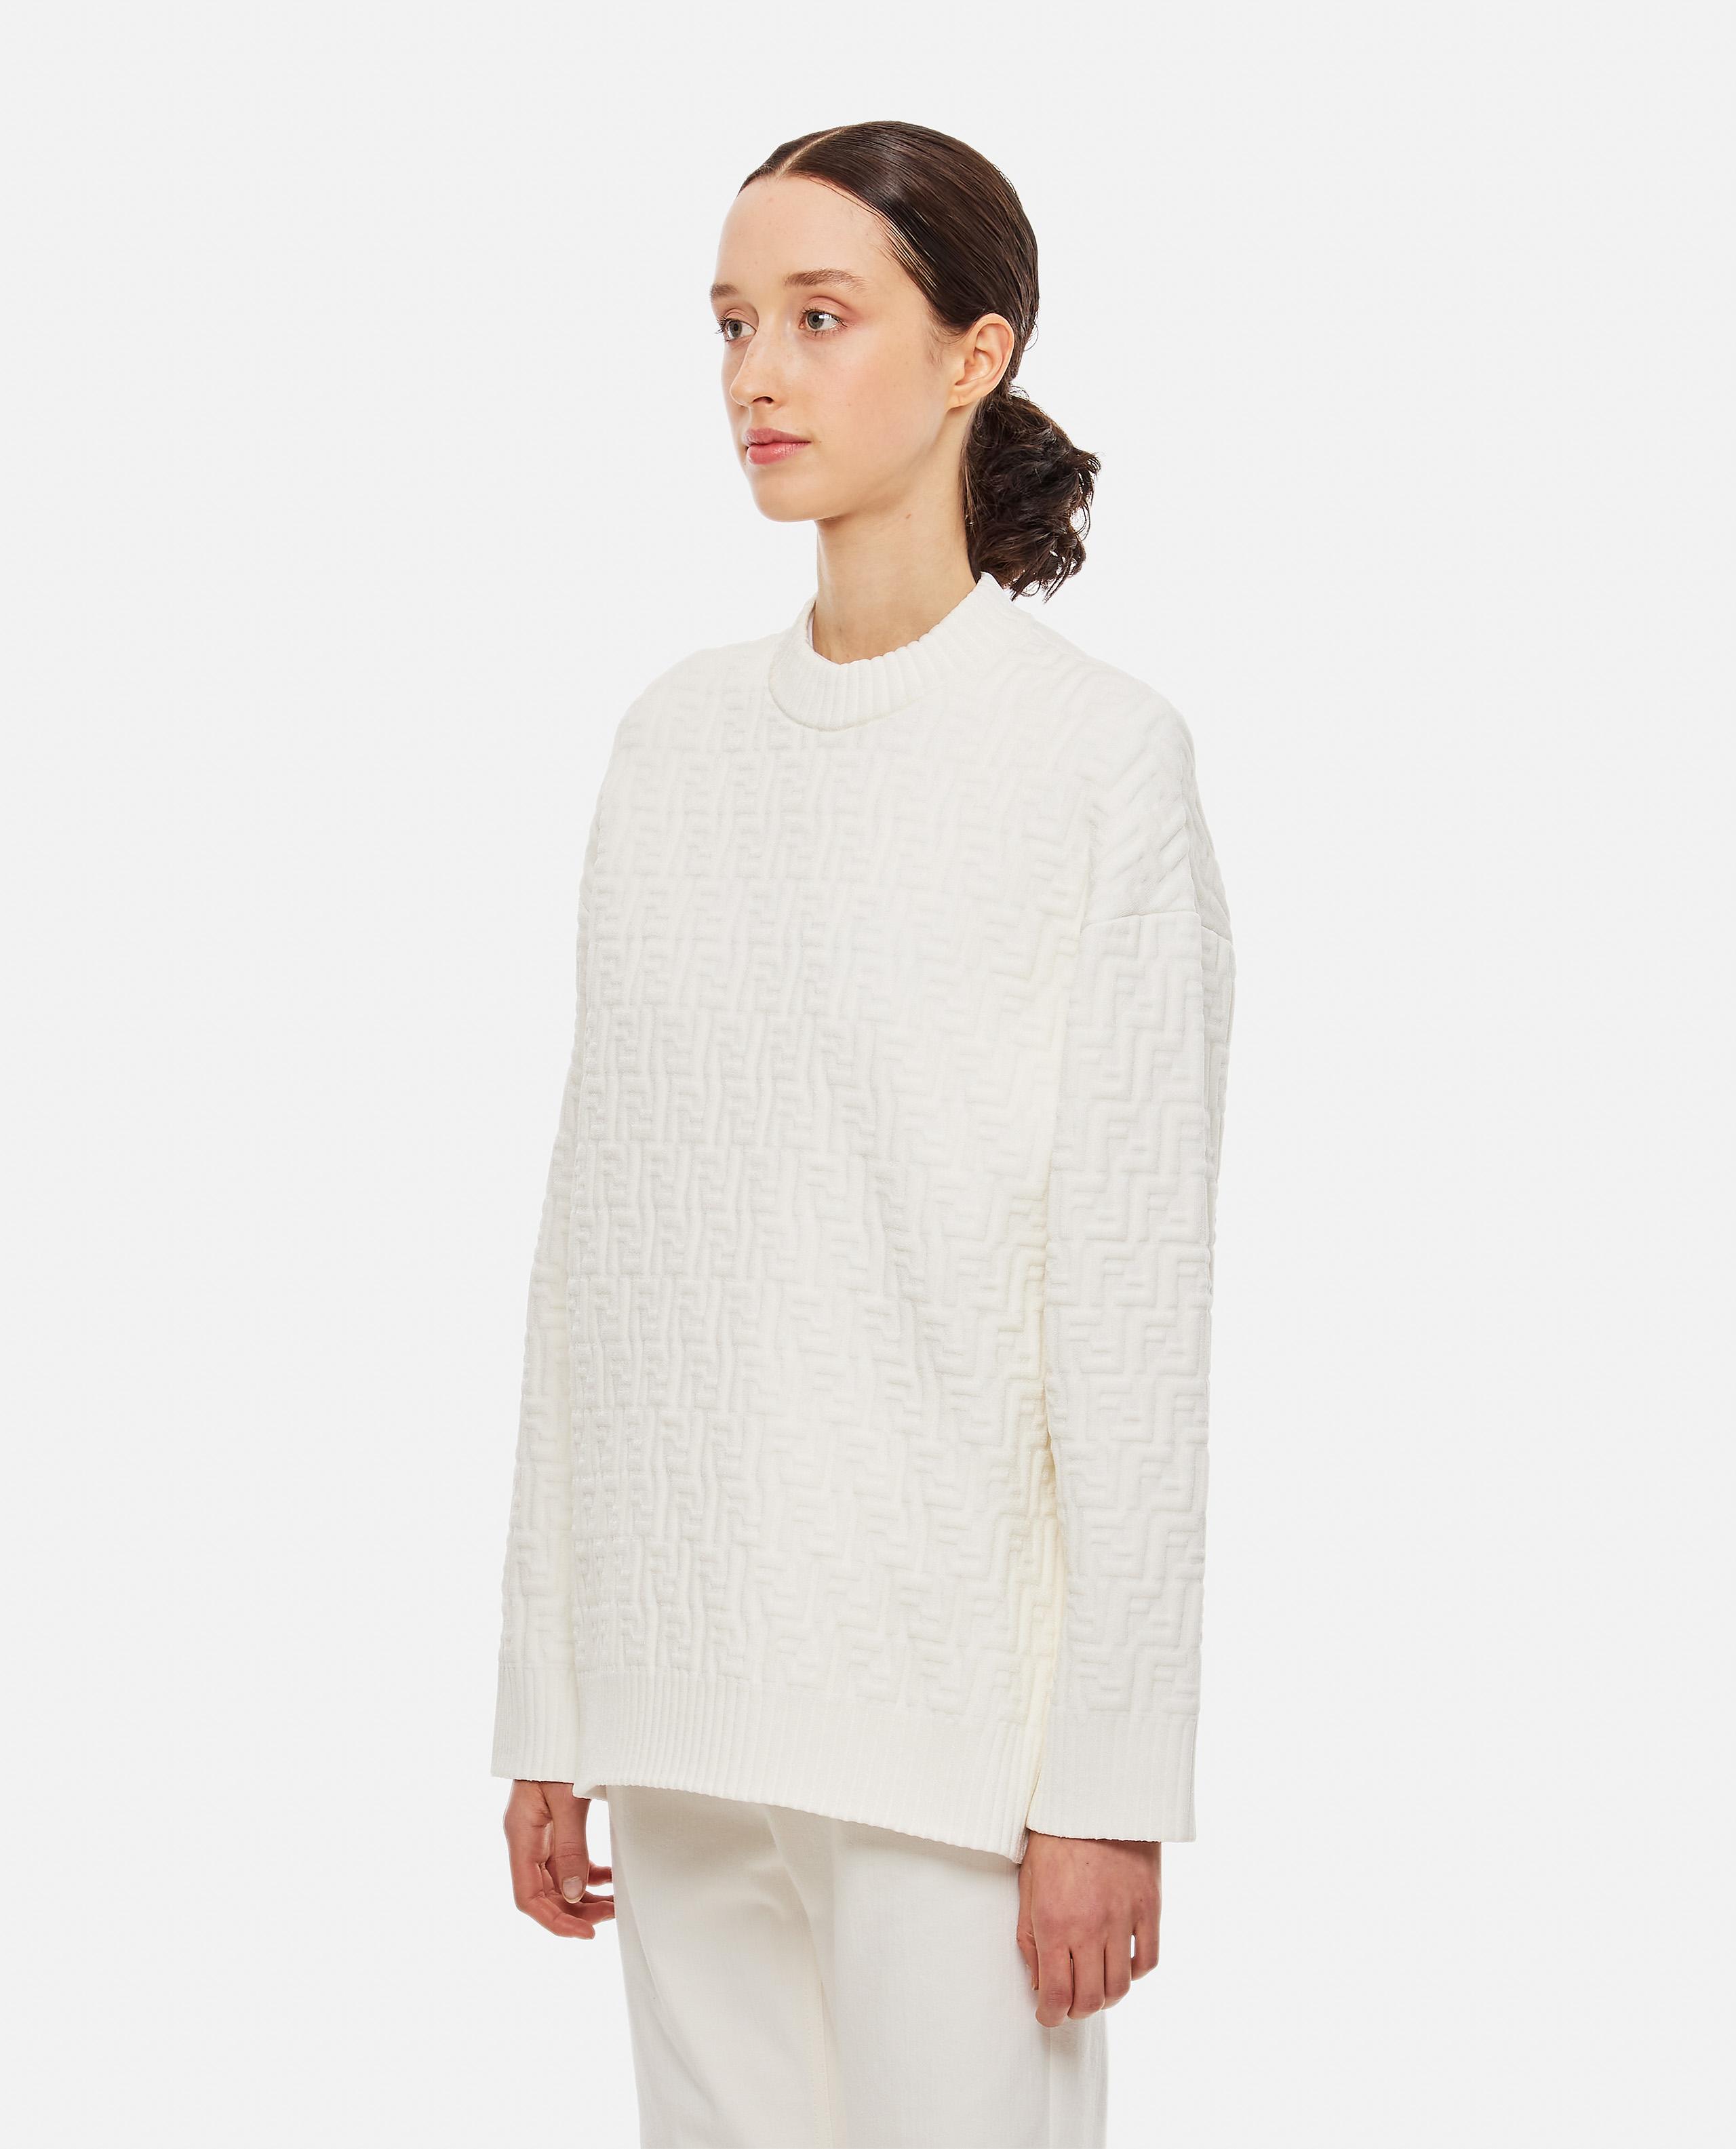 Fendi Ff Embossed Knitted Viscose Sweater in White | Lyst